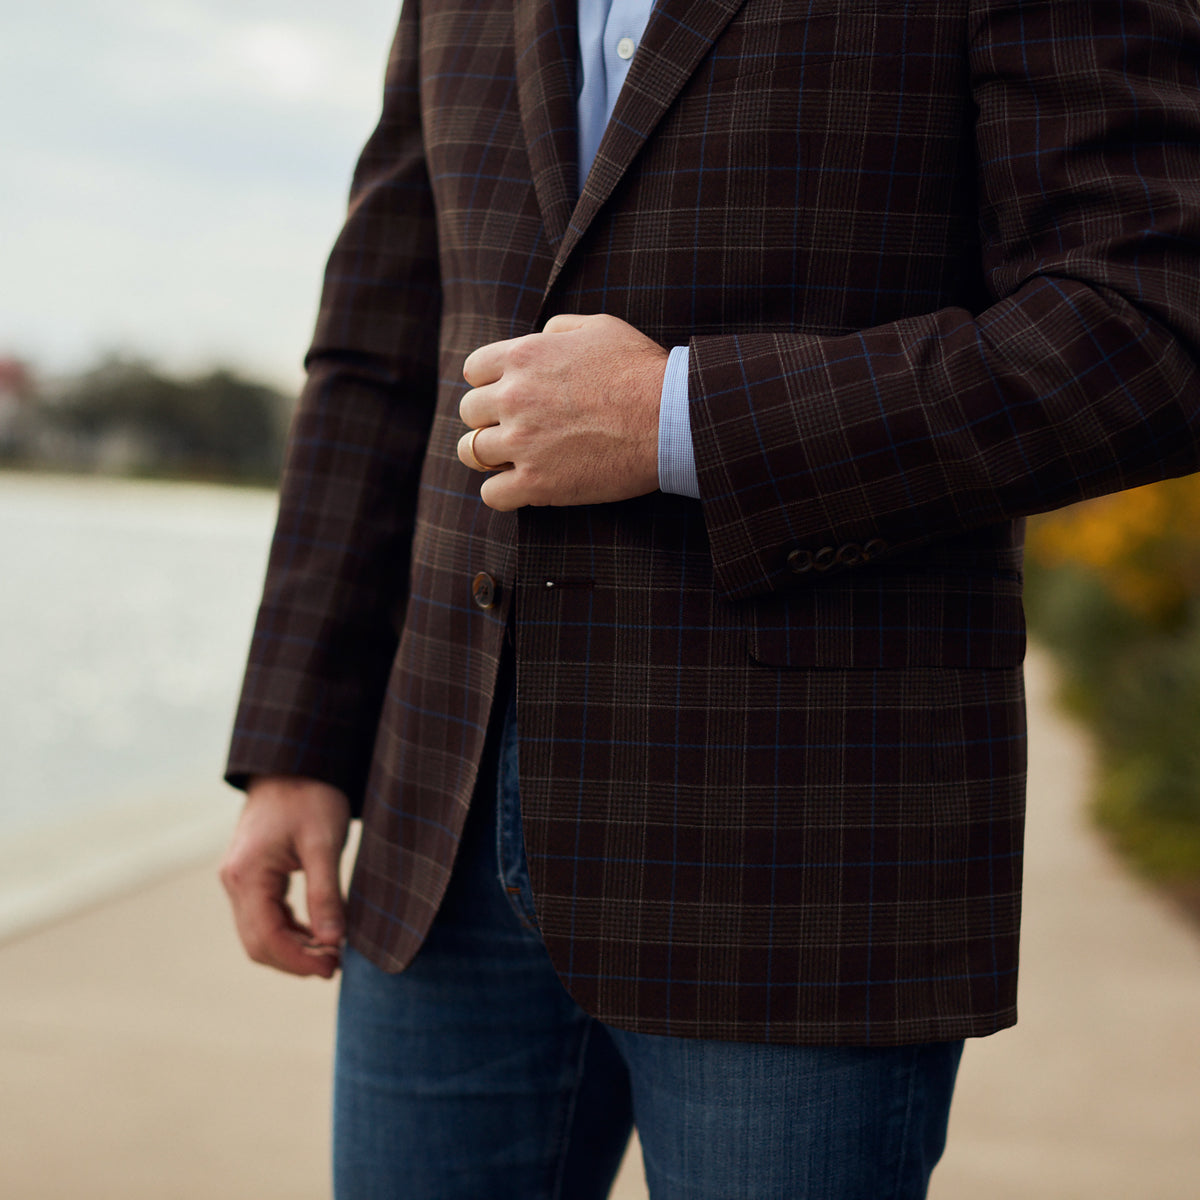 Warm chestnut tones and a hint of blue, the perfect blend and just the right balance. Lightweight construction keeps this look preppy without being stuffy.  100% Lt. Weight Wool • Natural Shoulder • Two Button • Flap Pockets • 1/4 Lined • Side Vents • Notch Label • Dry Clean Only • Made in USA🇺🇲